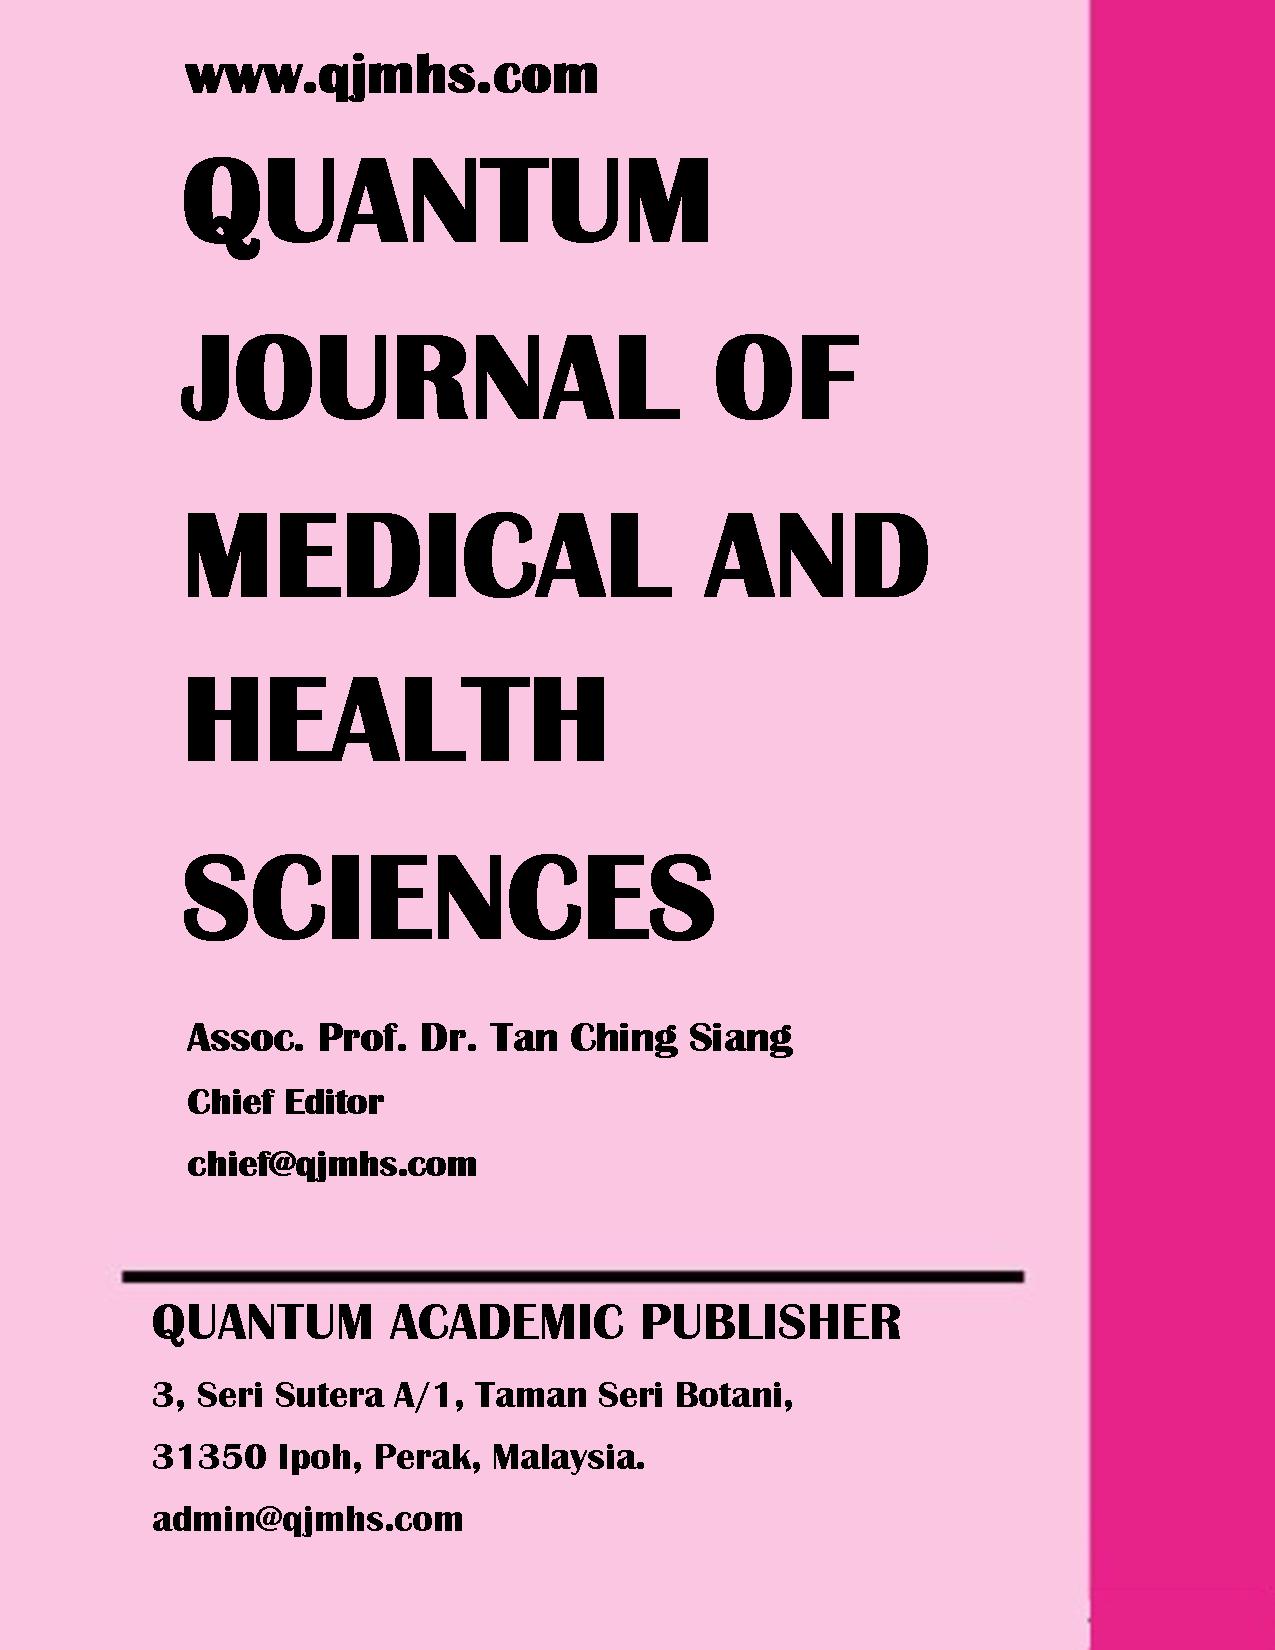 Quantum Journal of Medical and Health Sciences